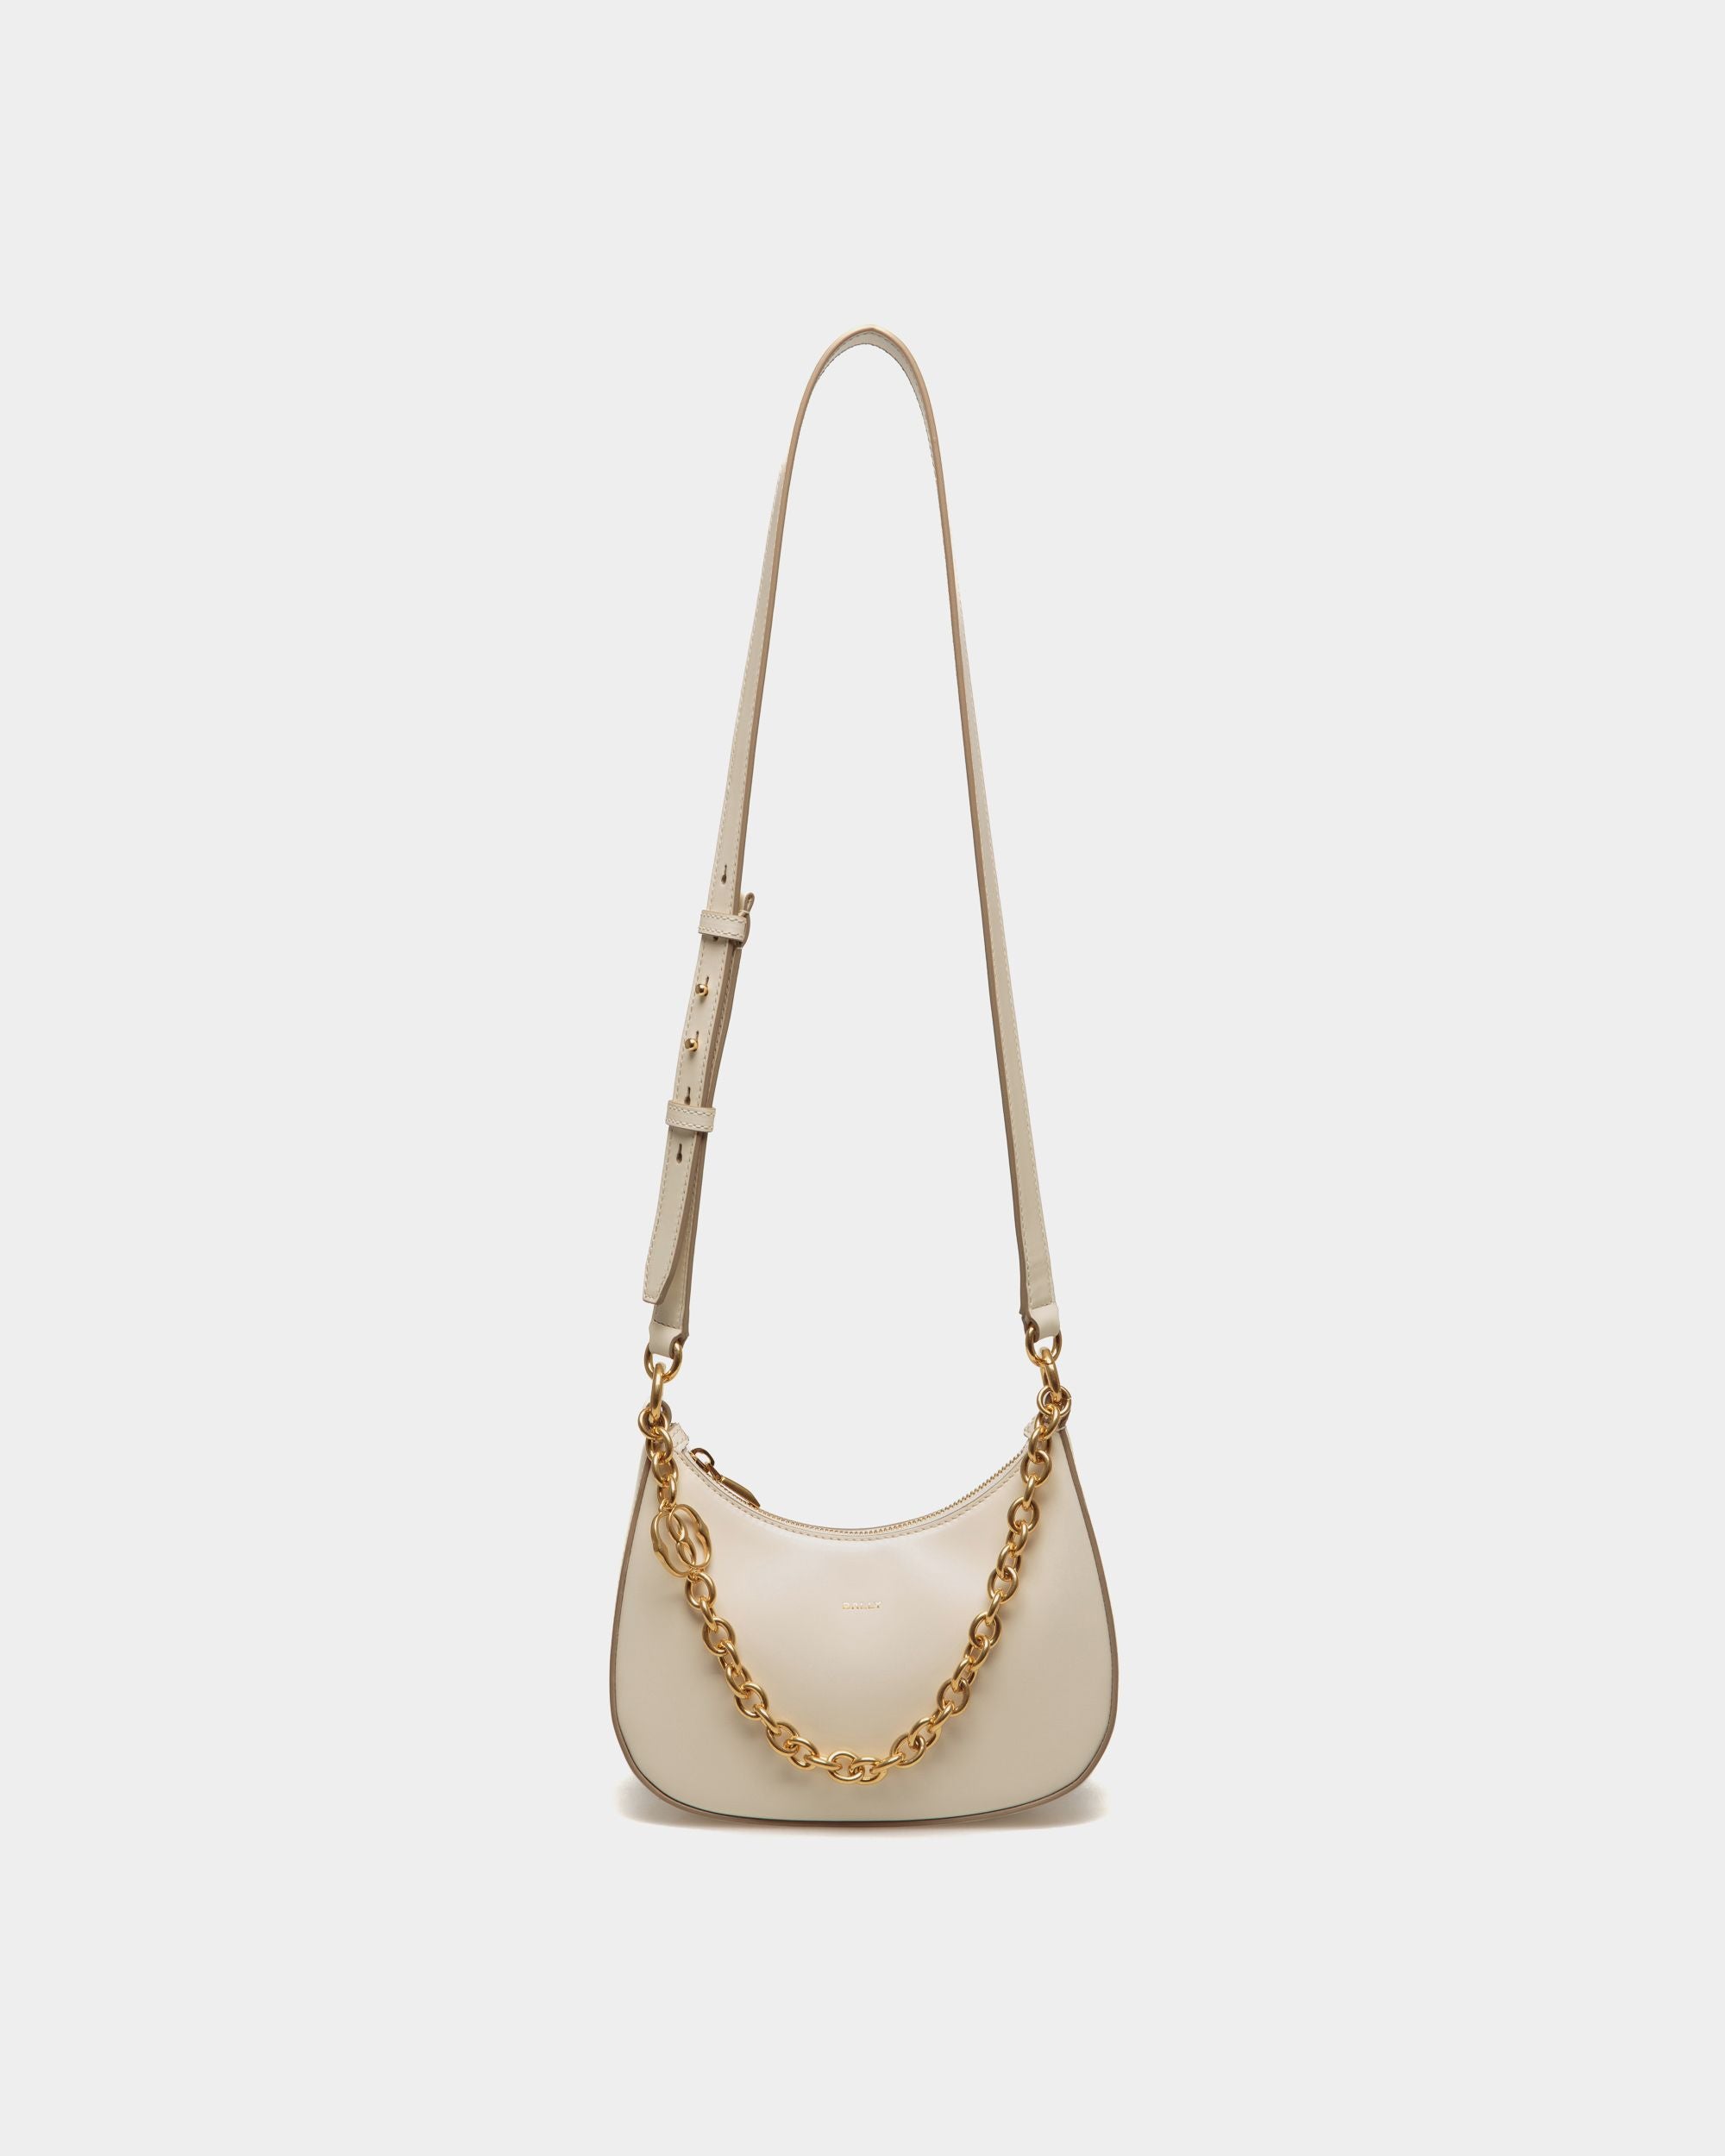 Women's Emblem Mini Crossbody Bag In White Brushed Leather | Bally | Still Life Front